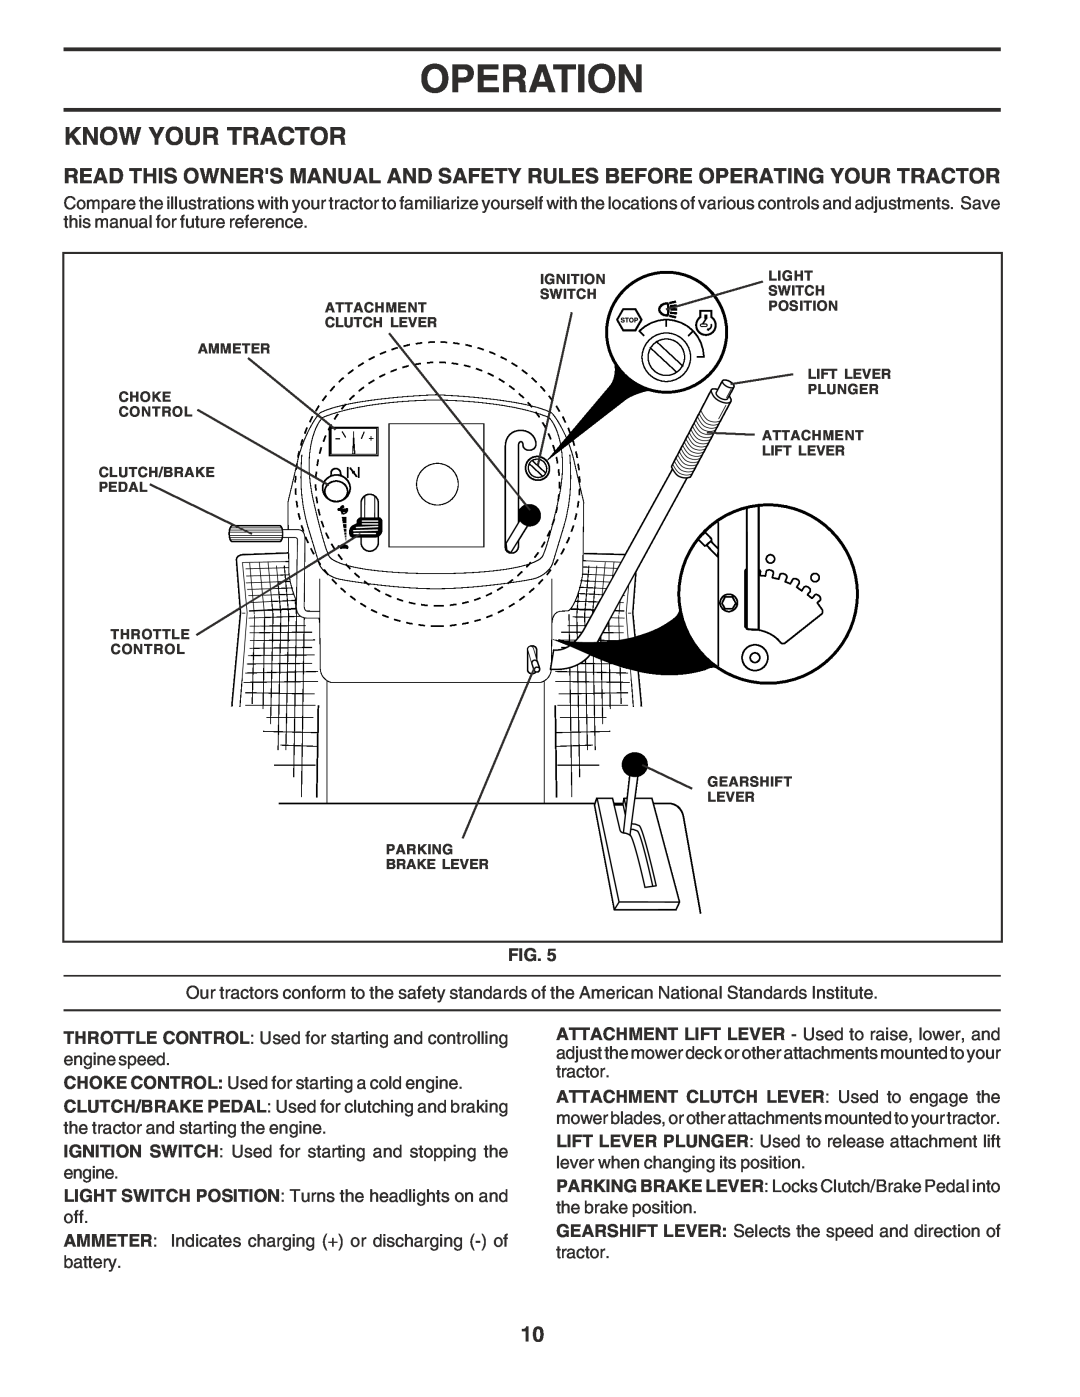 Poulan 183368 owner manual Know Your Tractor, Operation 